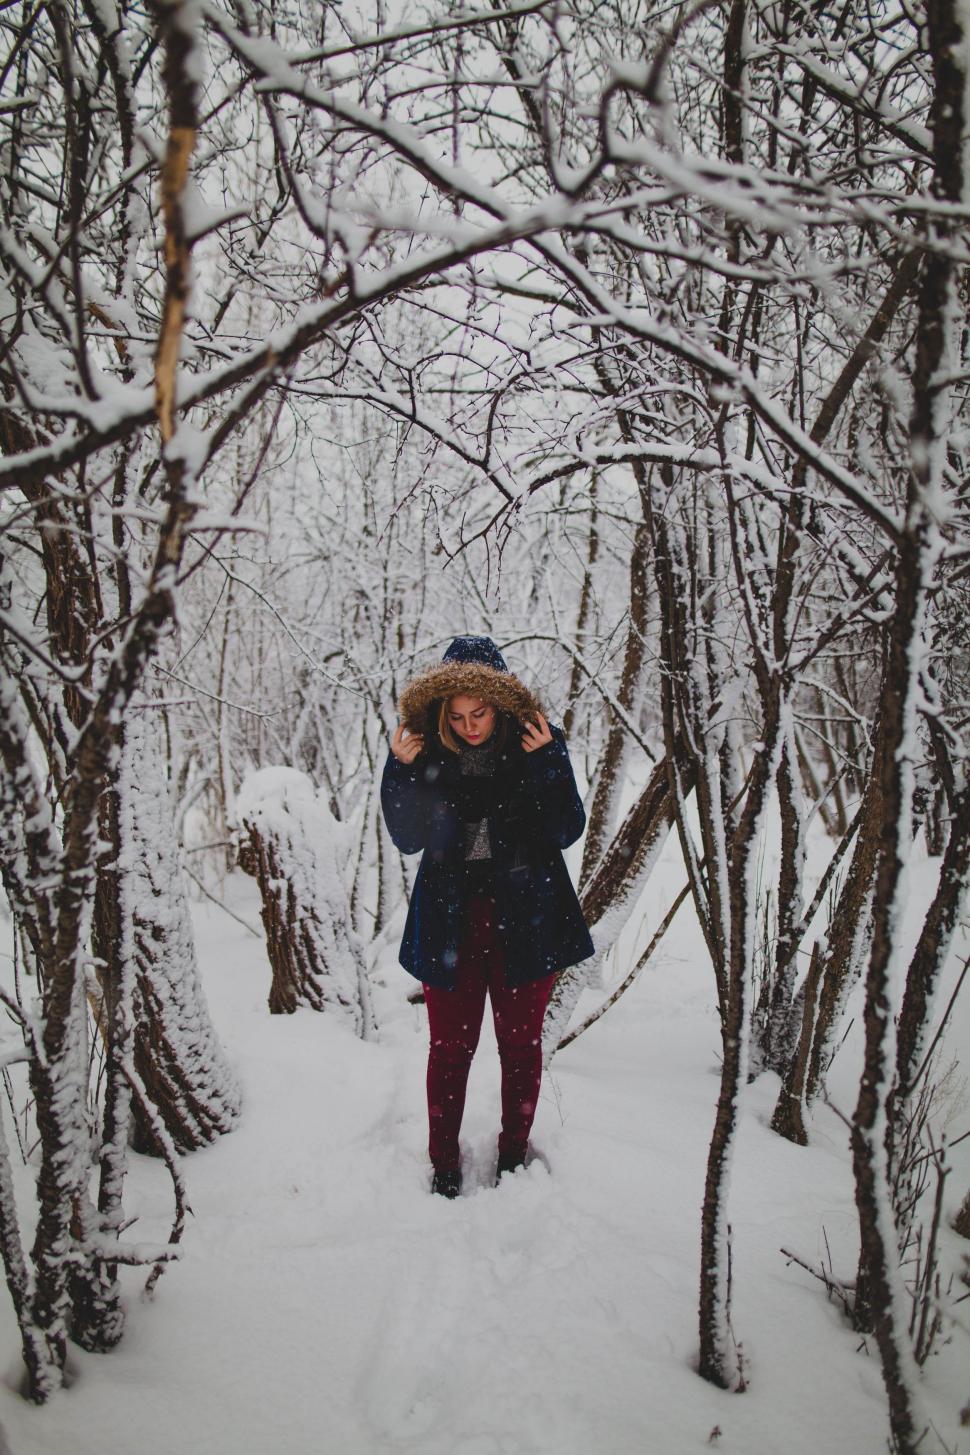 Free Image of Woman Walking Through Snow-Covered Forest 